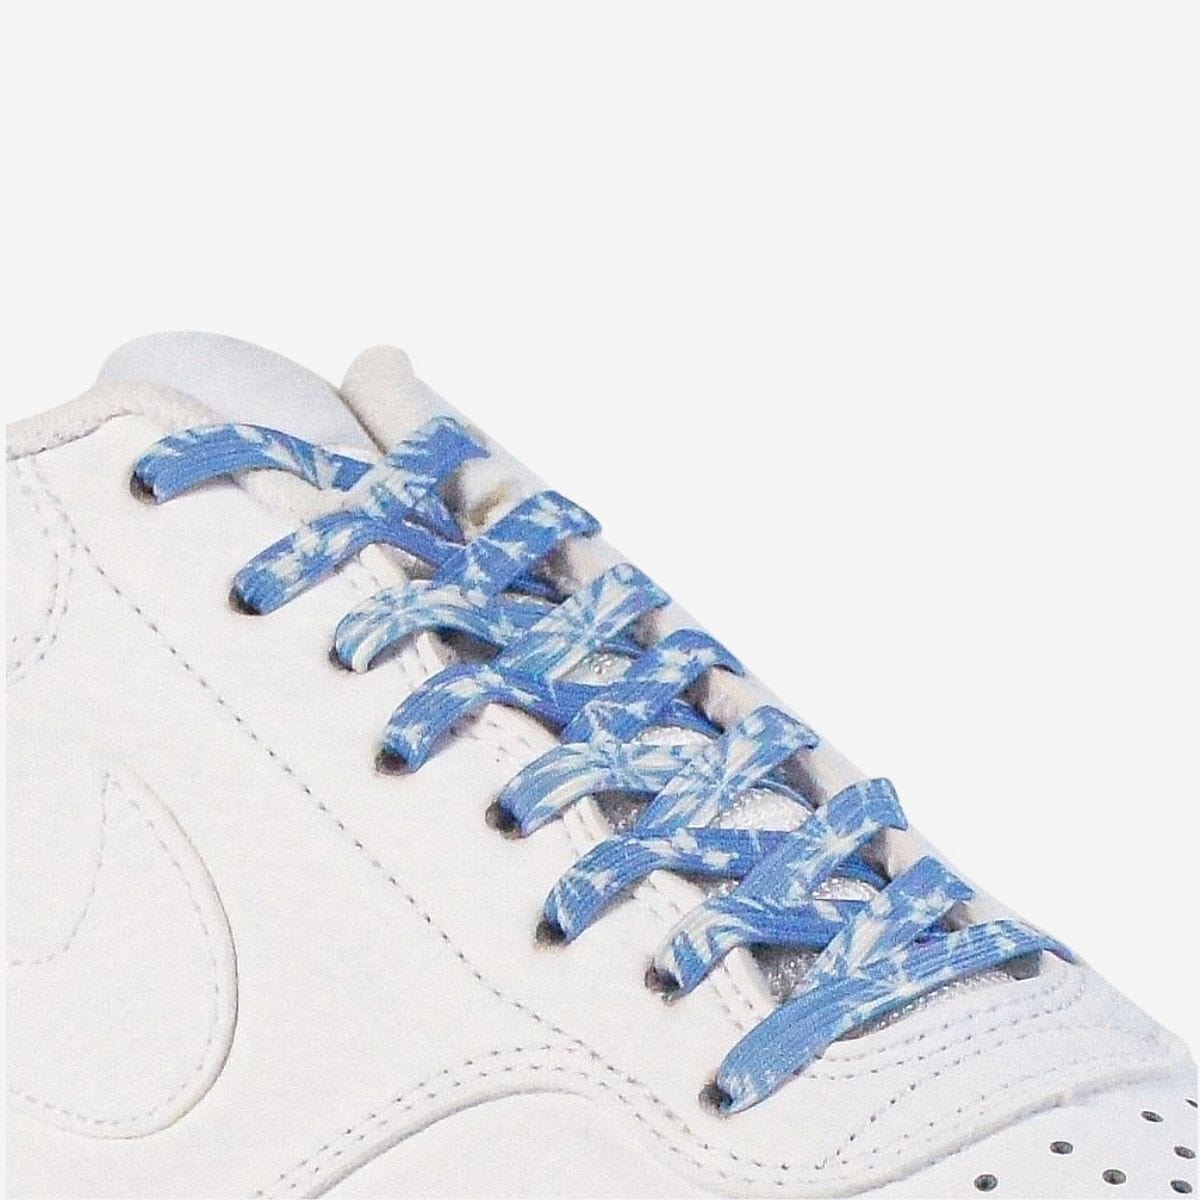 different-ways-to-lace-shoes-with-snowflake-elastic-shoelaces-on-white-kicks